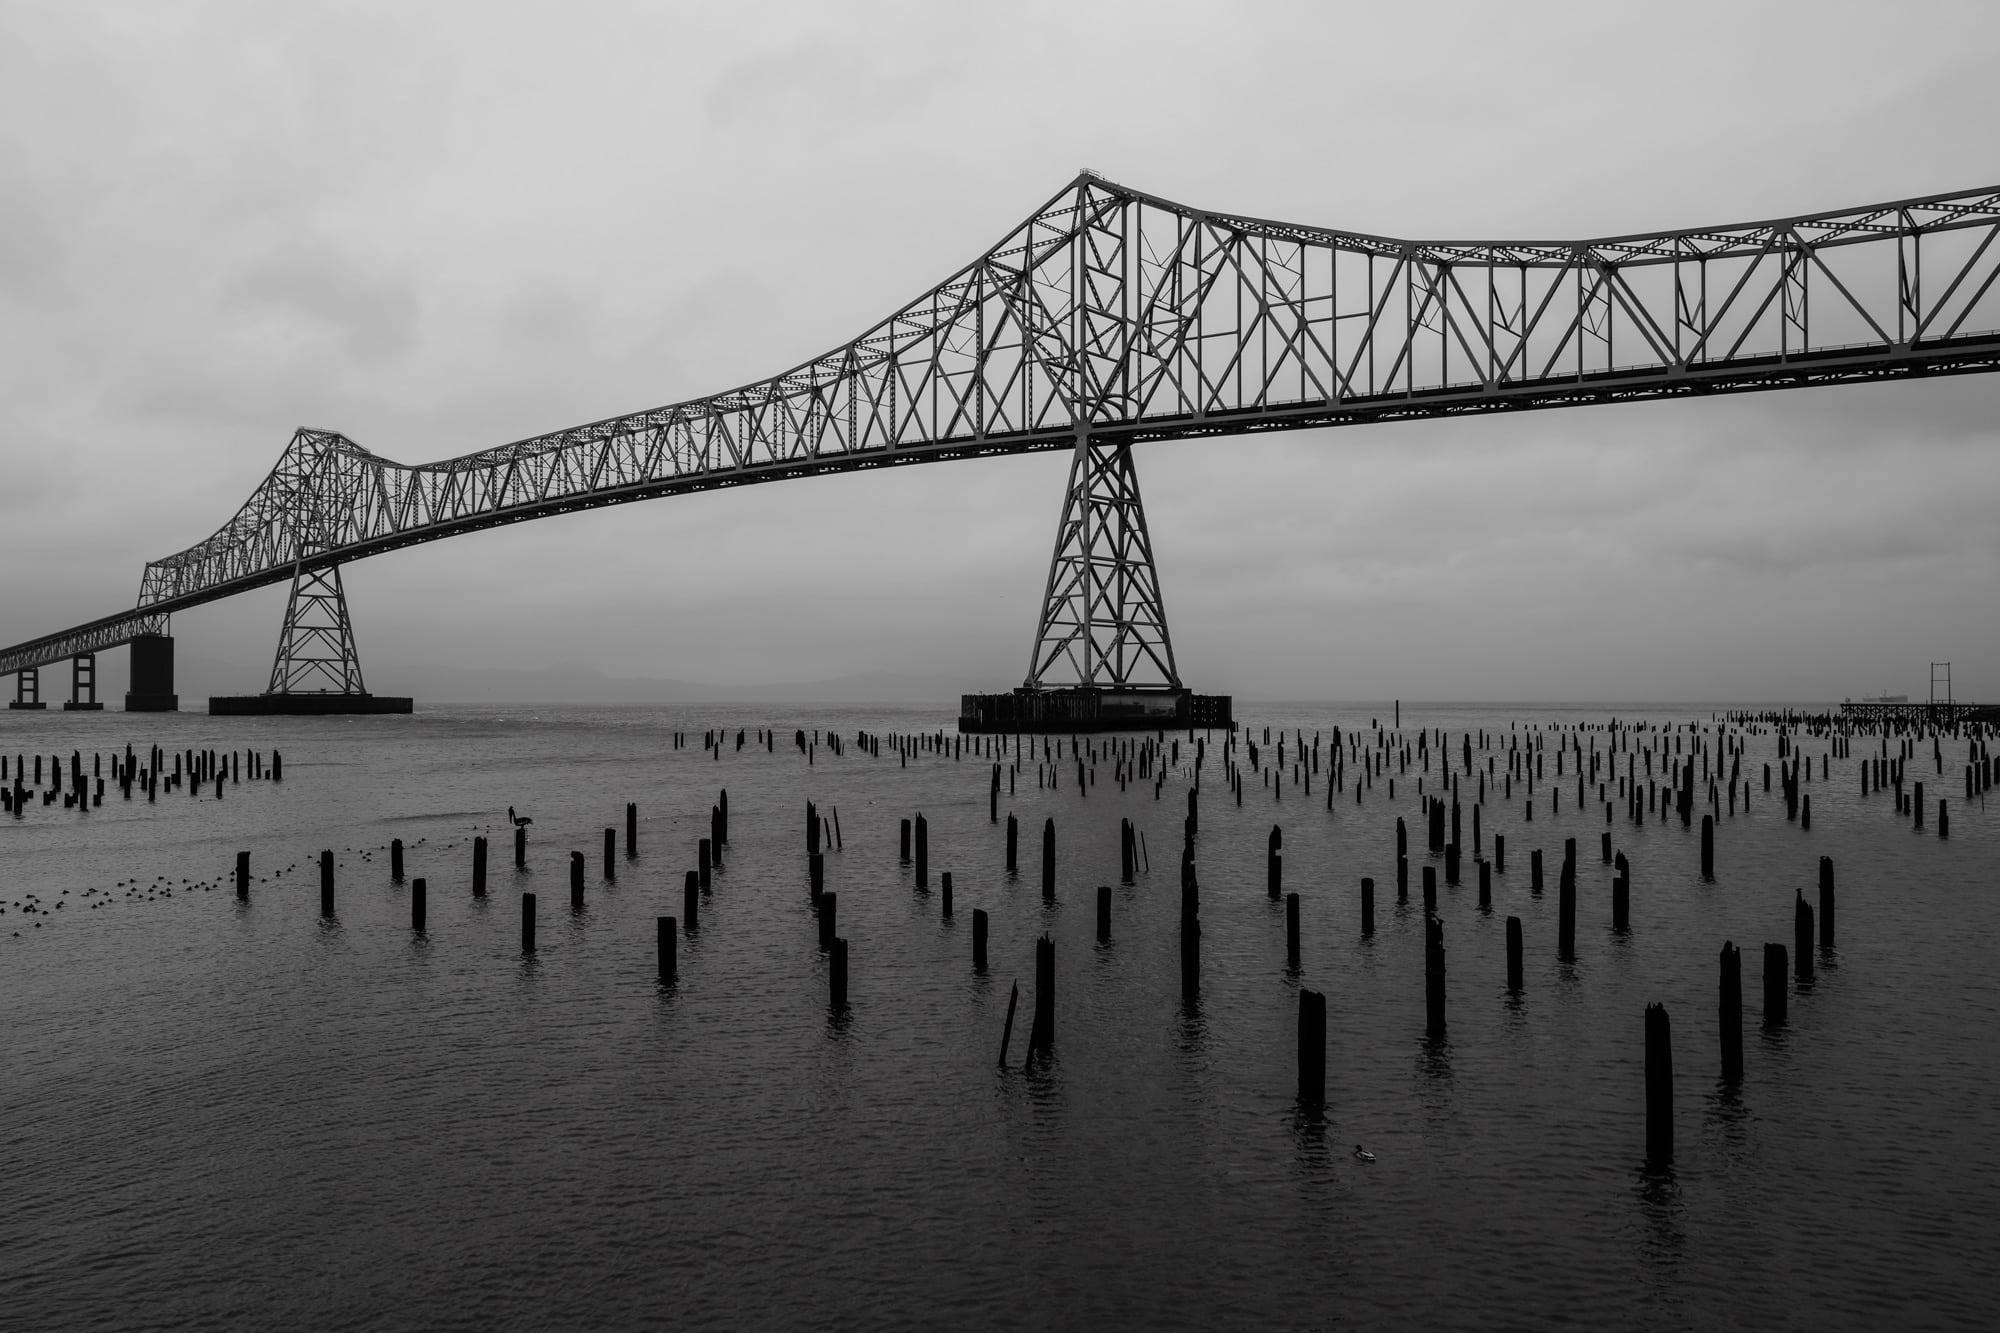 A black and white photograph of the Astoria-Megler Bridge that spans the Columbia River between Oregon and Washington state along US Route 101.